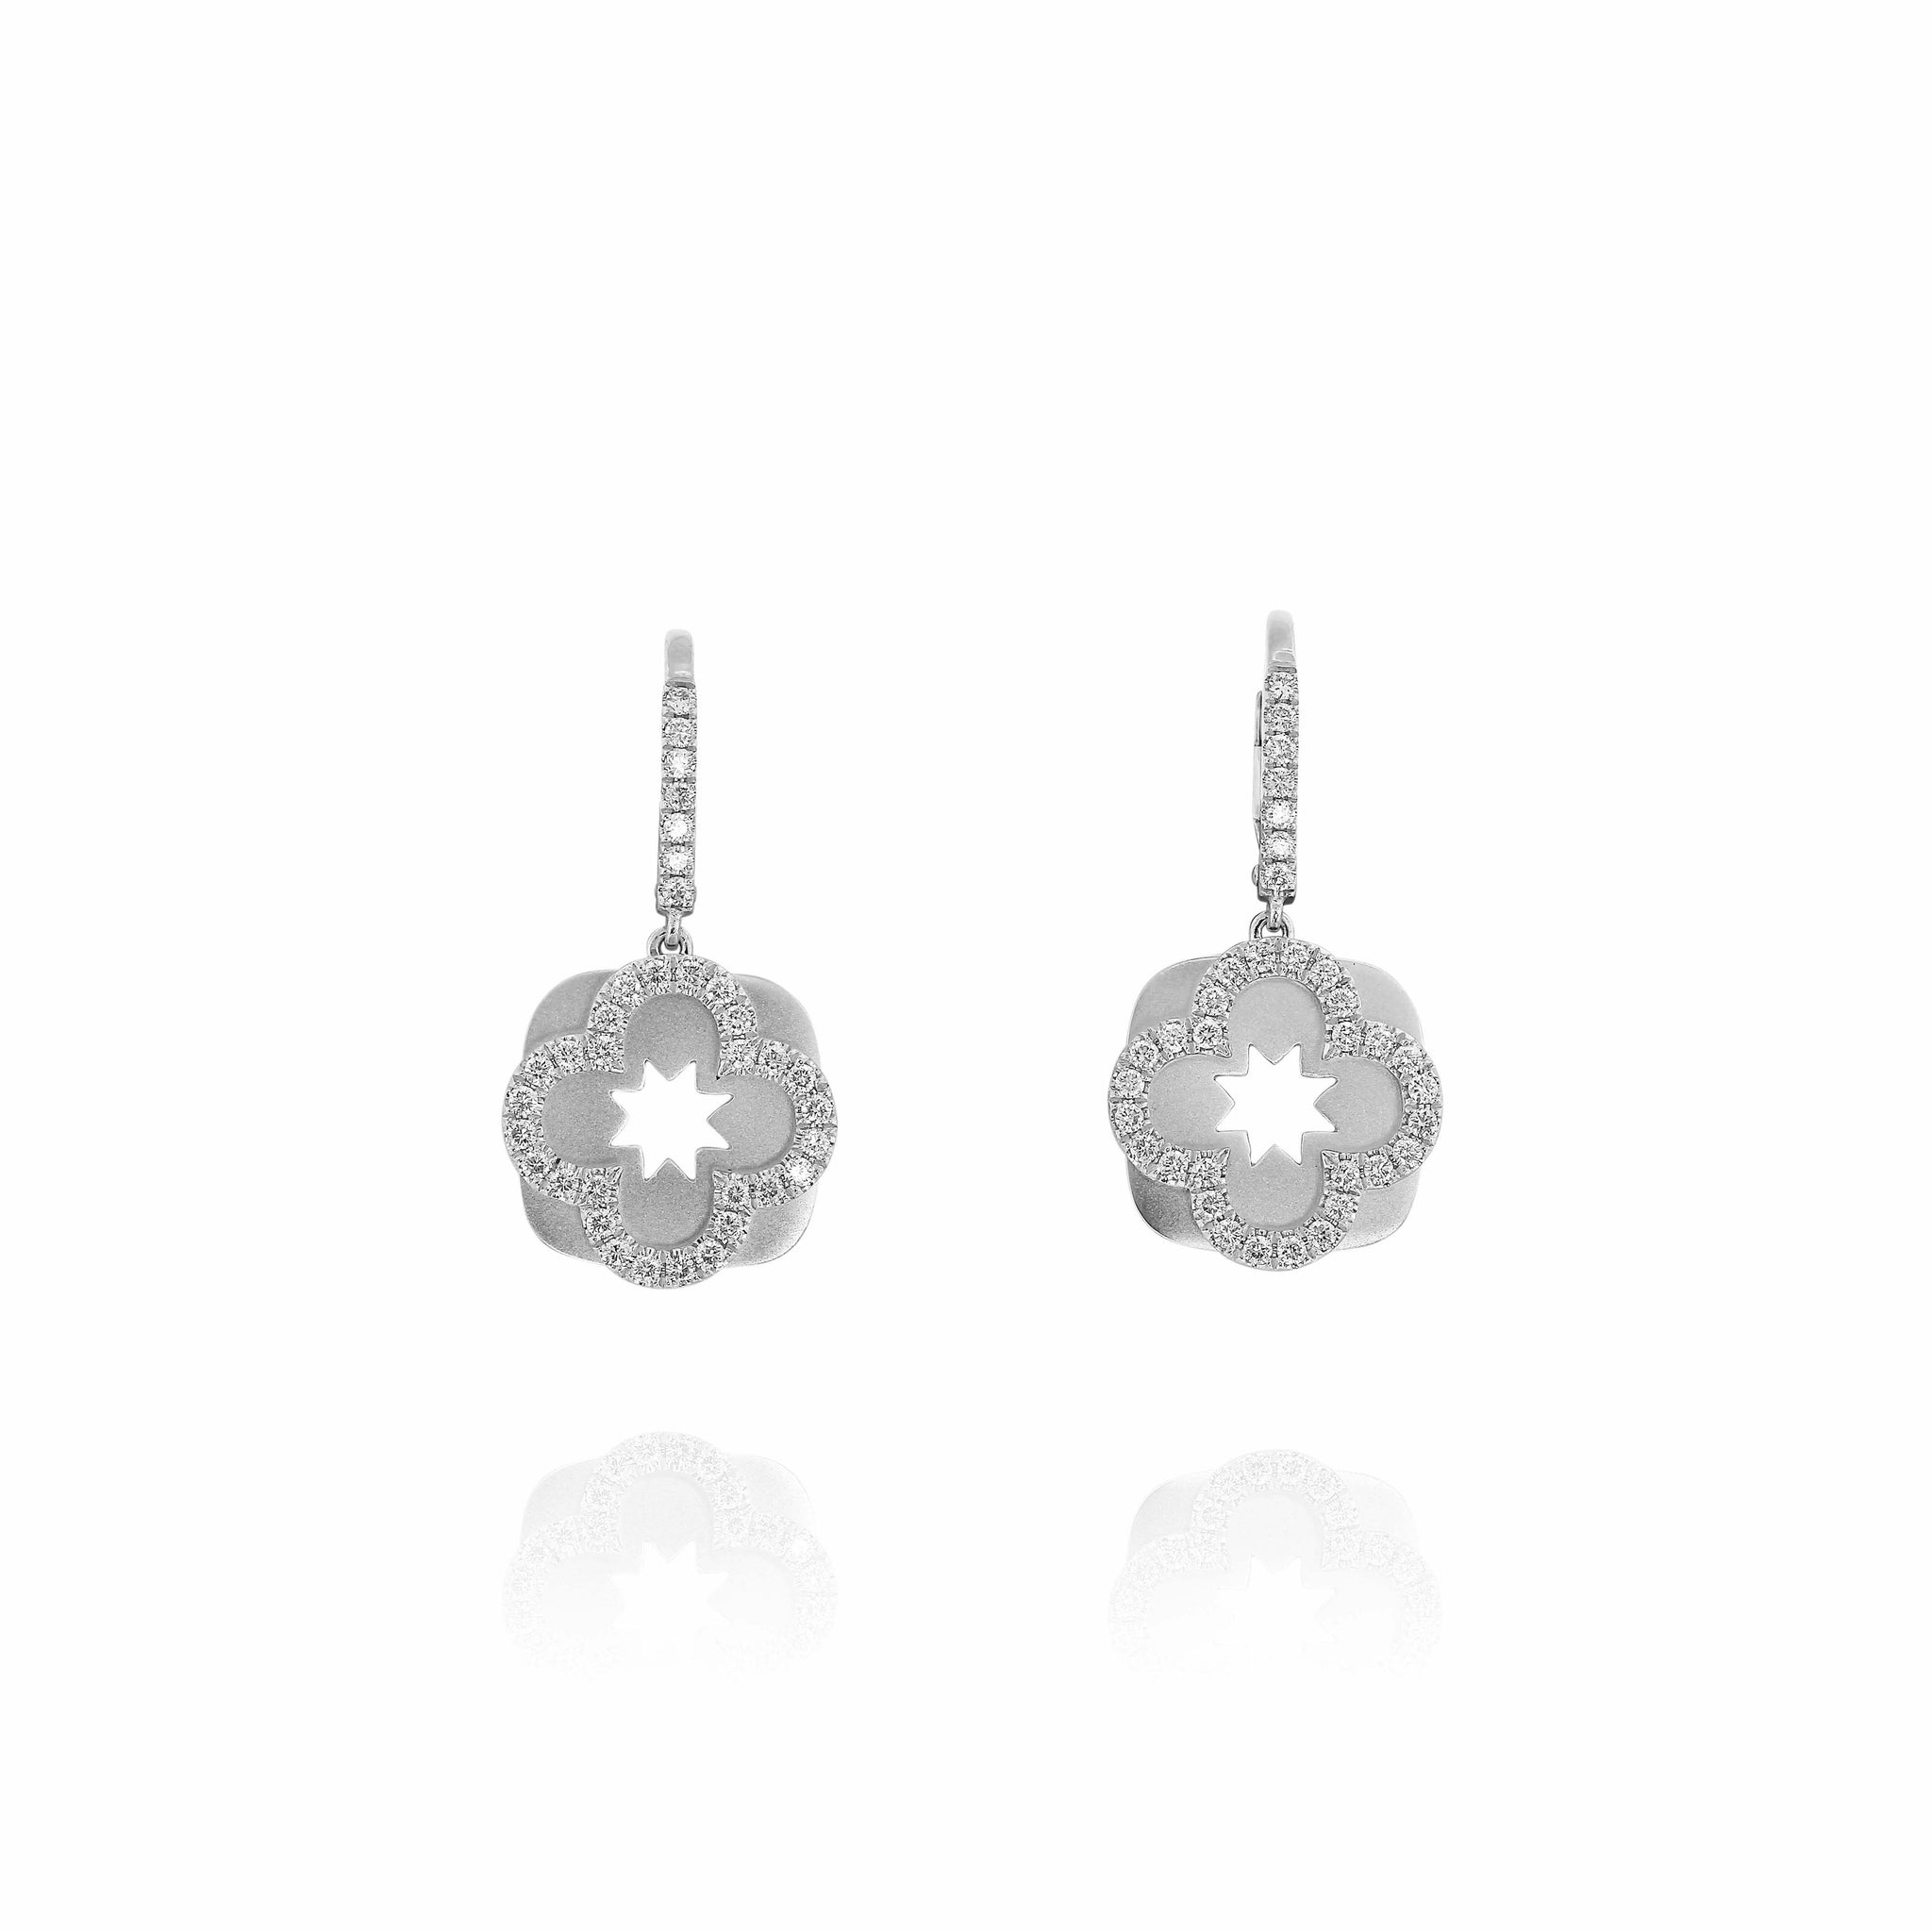 Flora Blossom Drop Earrings, White Gold and Diamonds